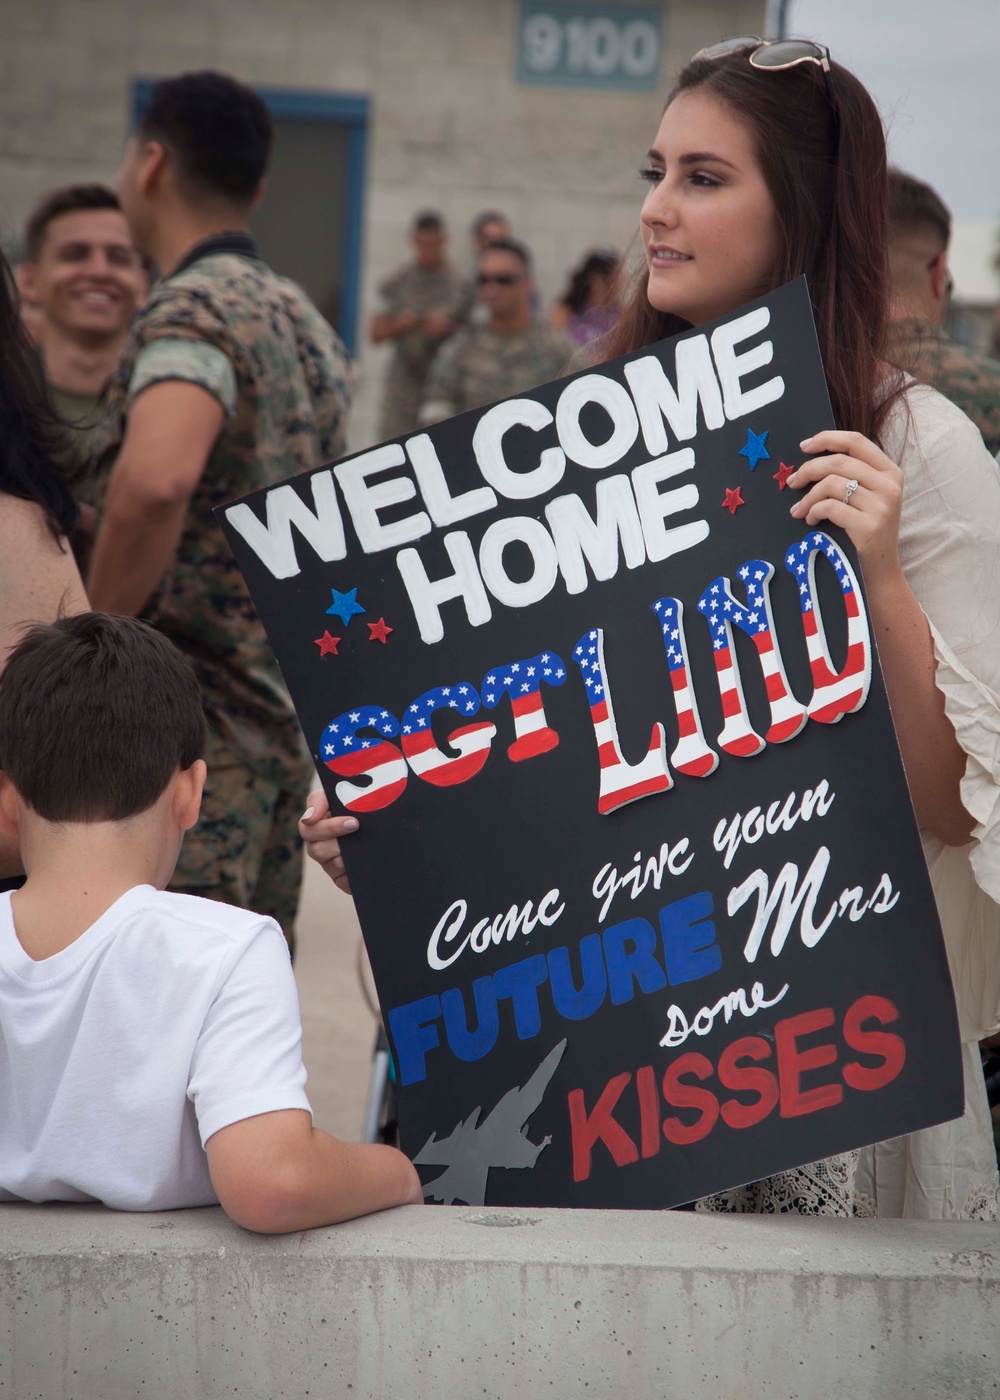 Red Devils return home from a six month deployment